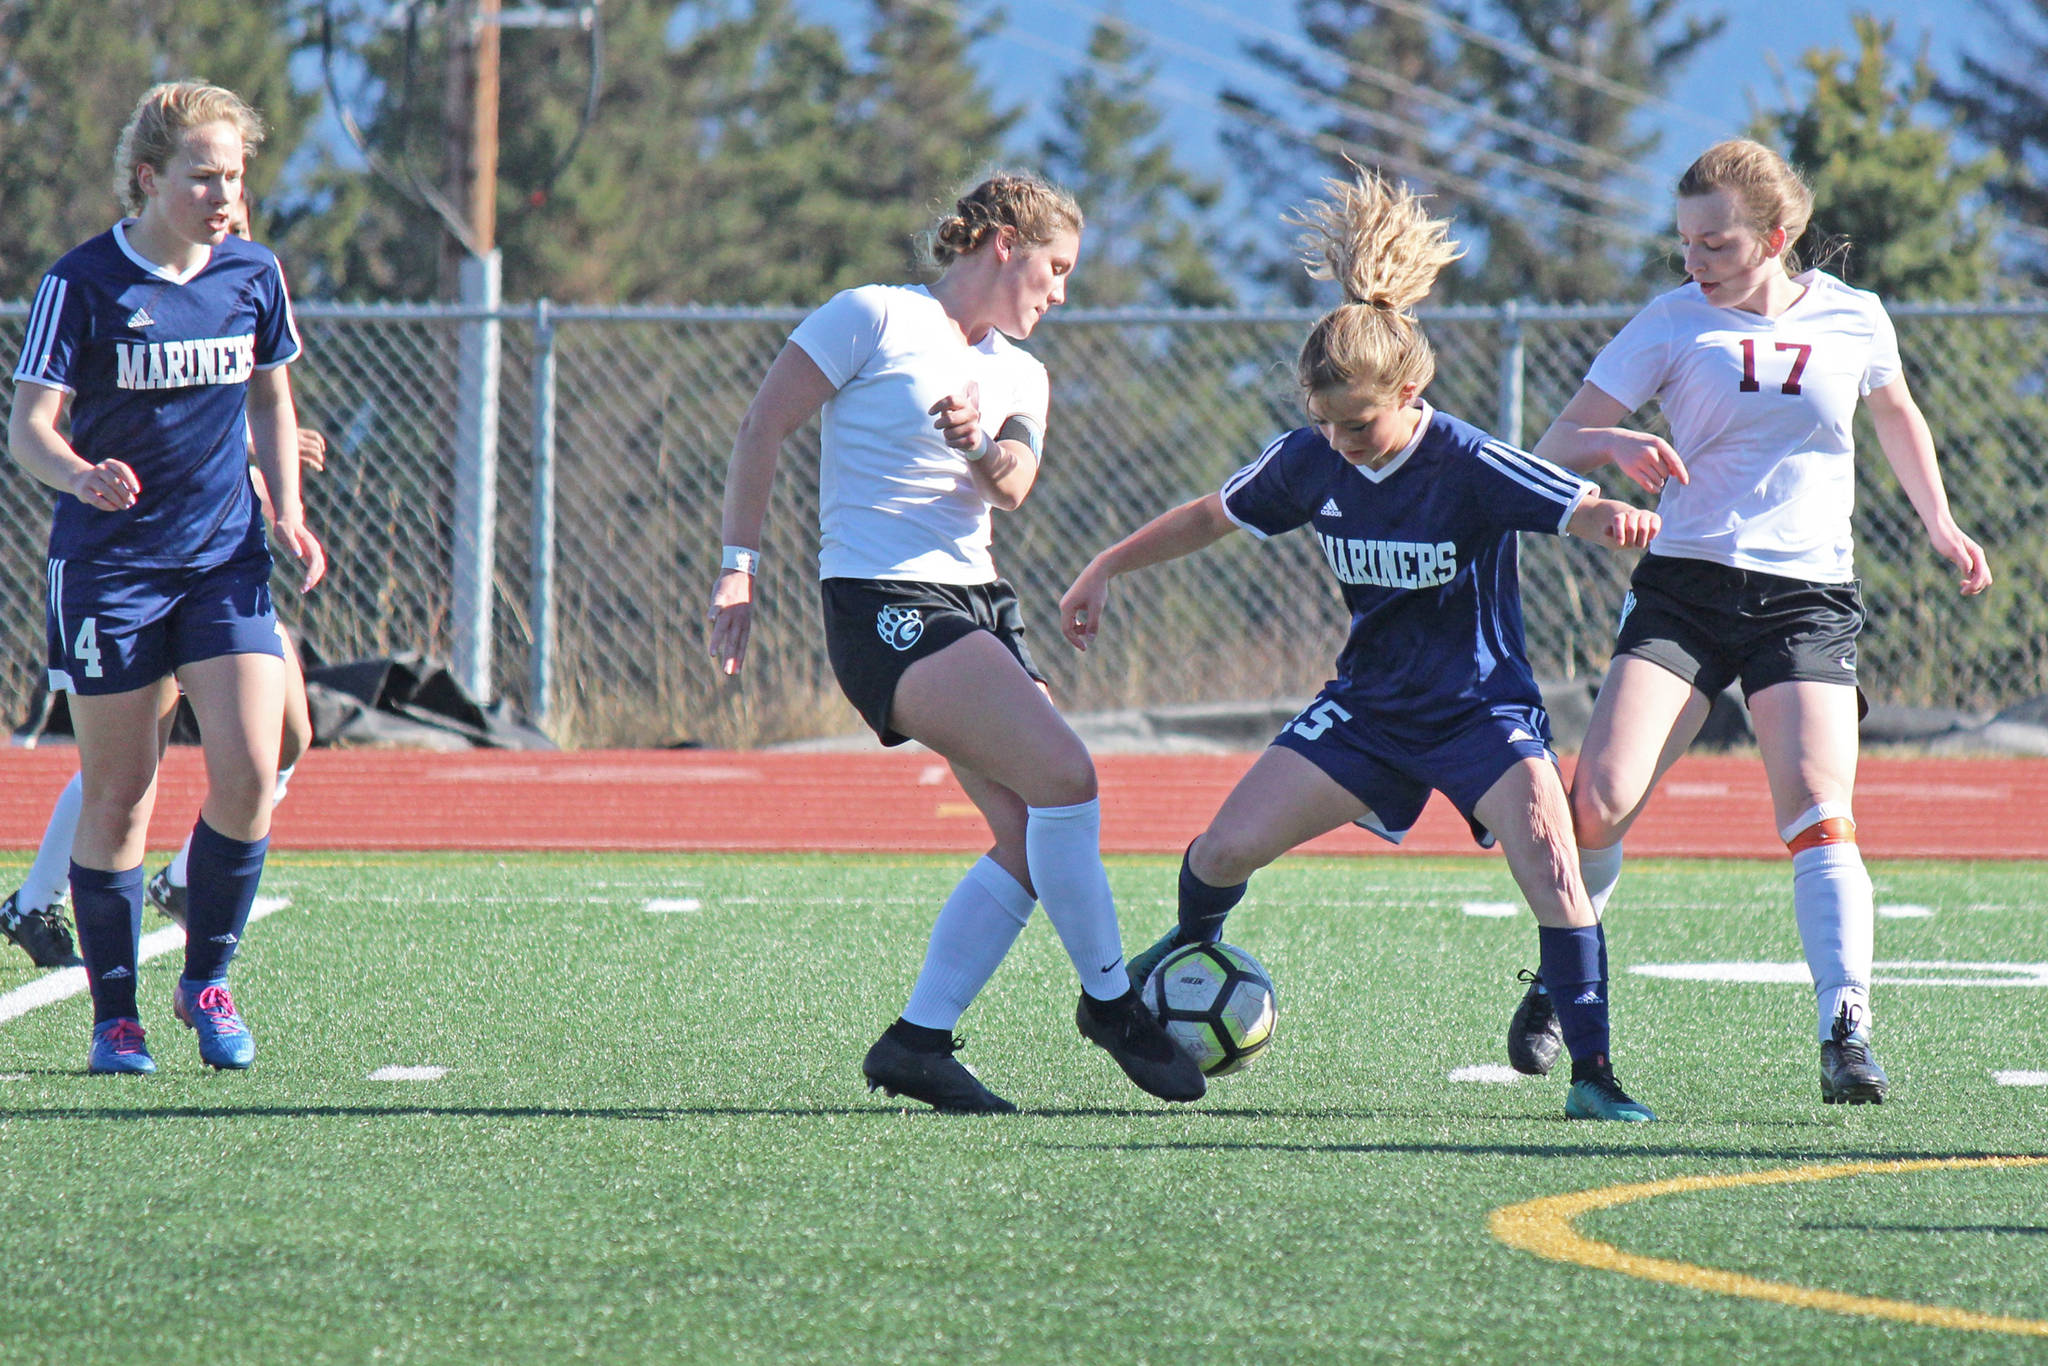 Homer Mariner Sela Weisser goes toe-to-toe with a Grace Action player during Friday’s varsity soccer game on April 26, 2019, at the high school in Homer, Alaska. Teammate Jessica Sonnen is ready to offer back-up. (Photo by McKibben Jackinsky)